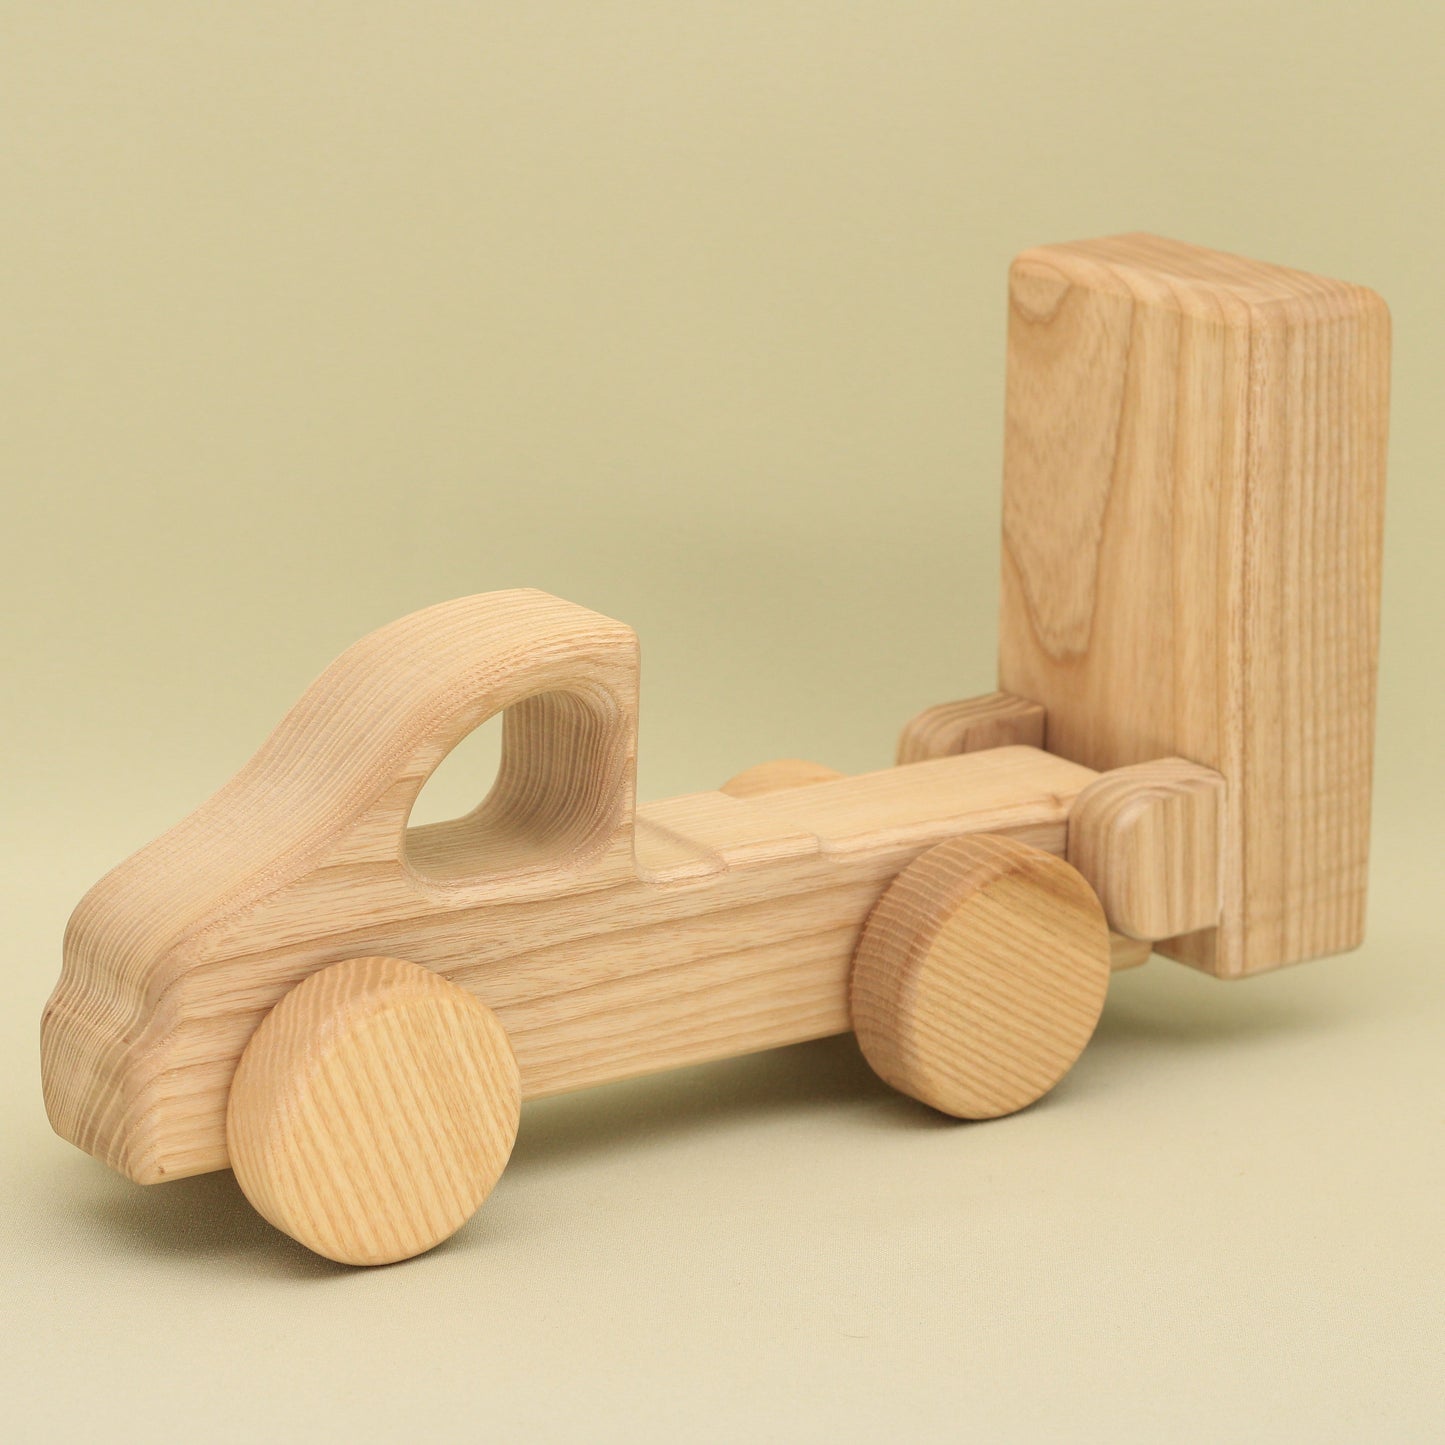 Lotes Toys Wooden Construction Vehicles Car BT11